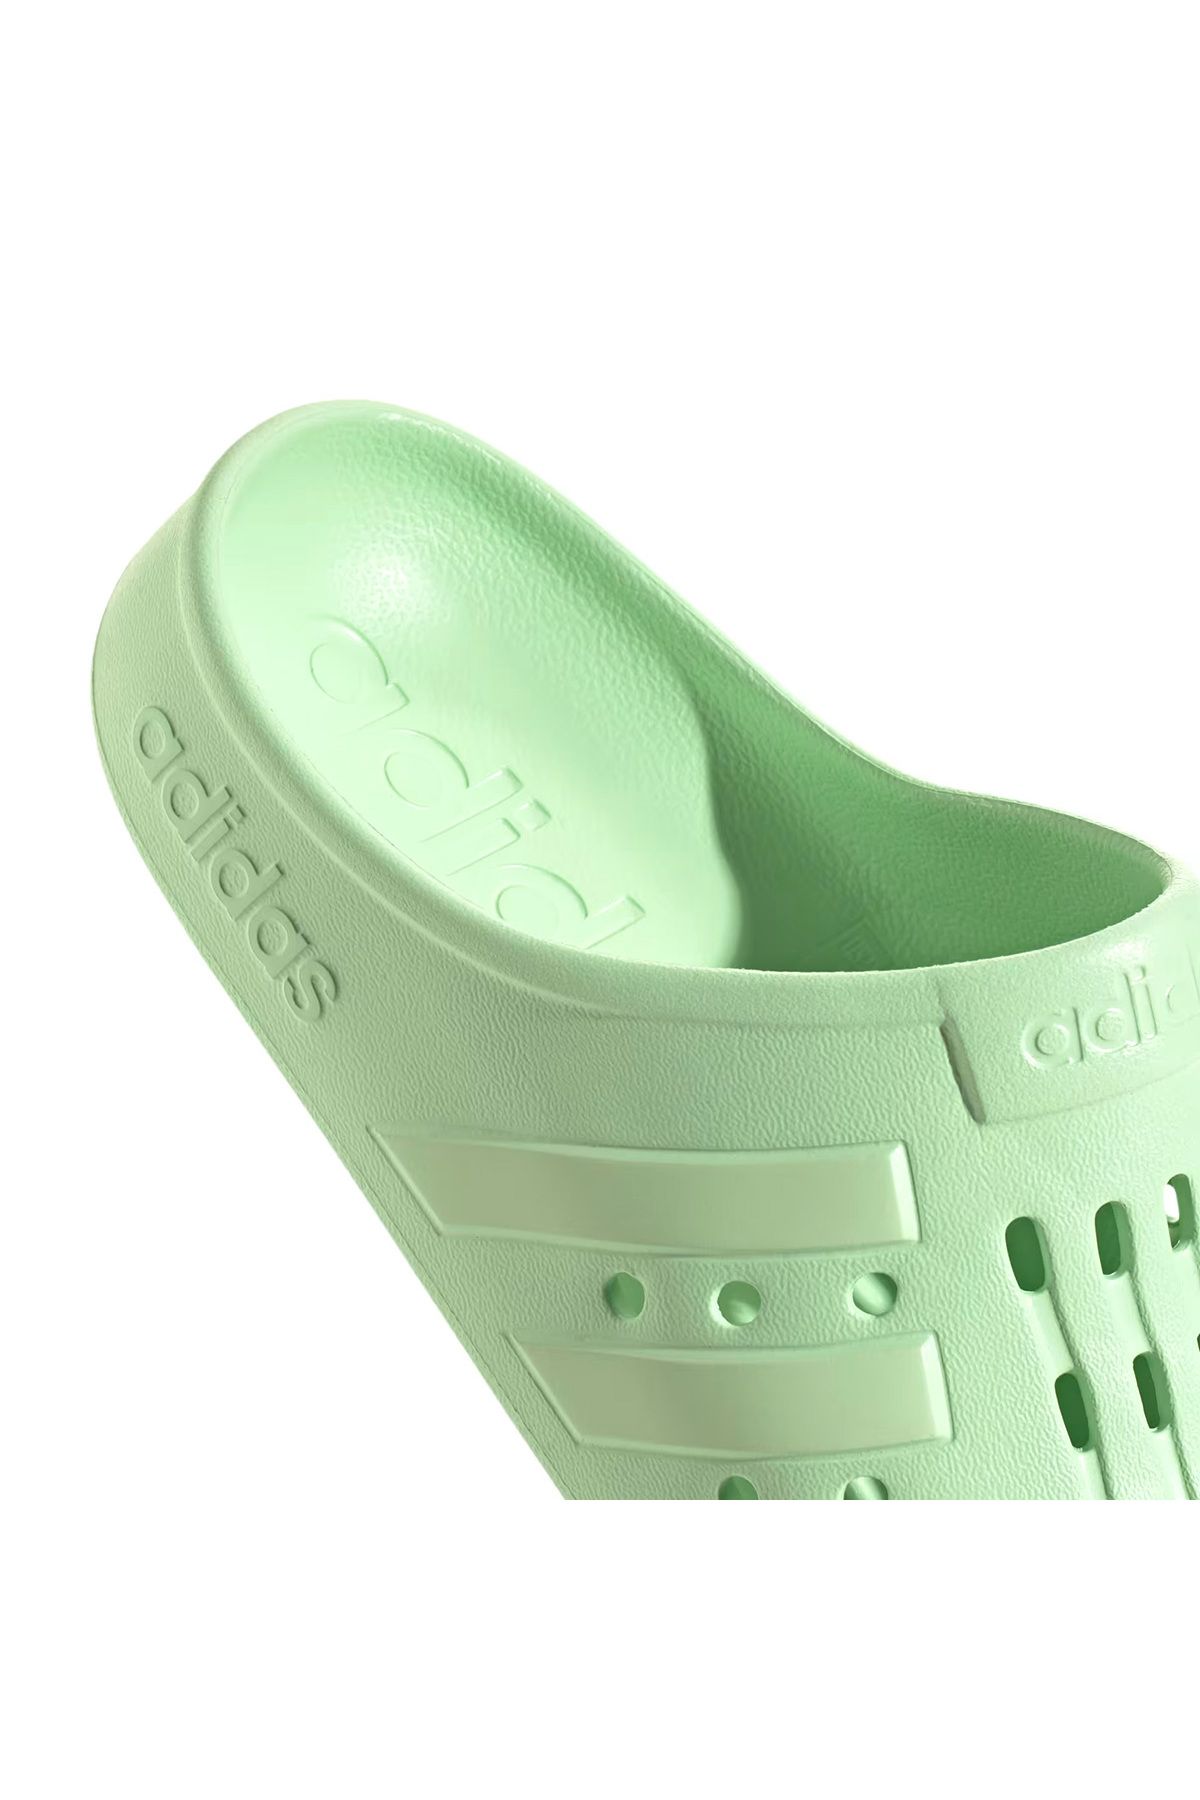 adidas Adilette Clog Unisex Green Daily Dippers IF0793